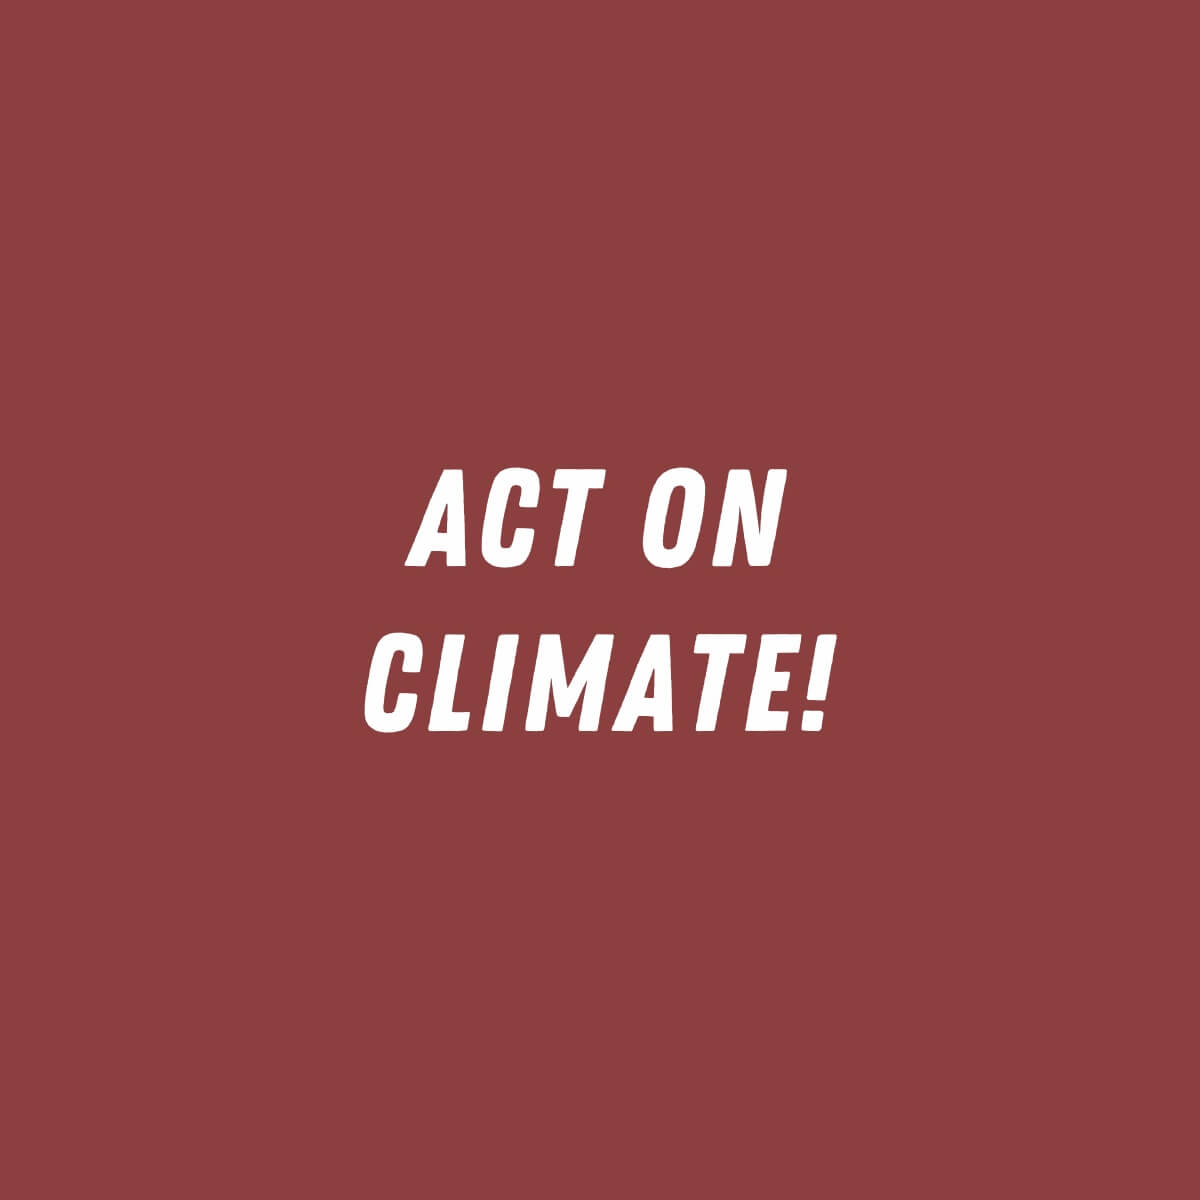 Climate change is happening right now - and it's wreaking havoc on our public health and our economy. We must act boldly.  Image